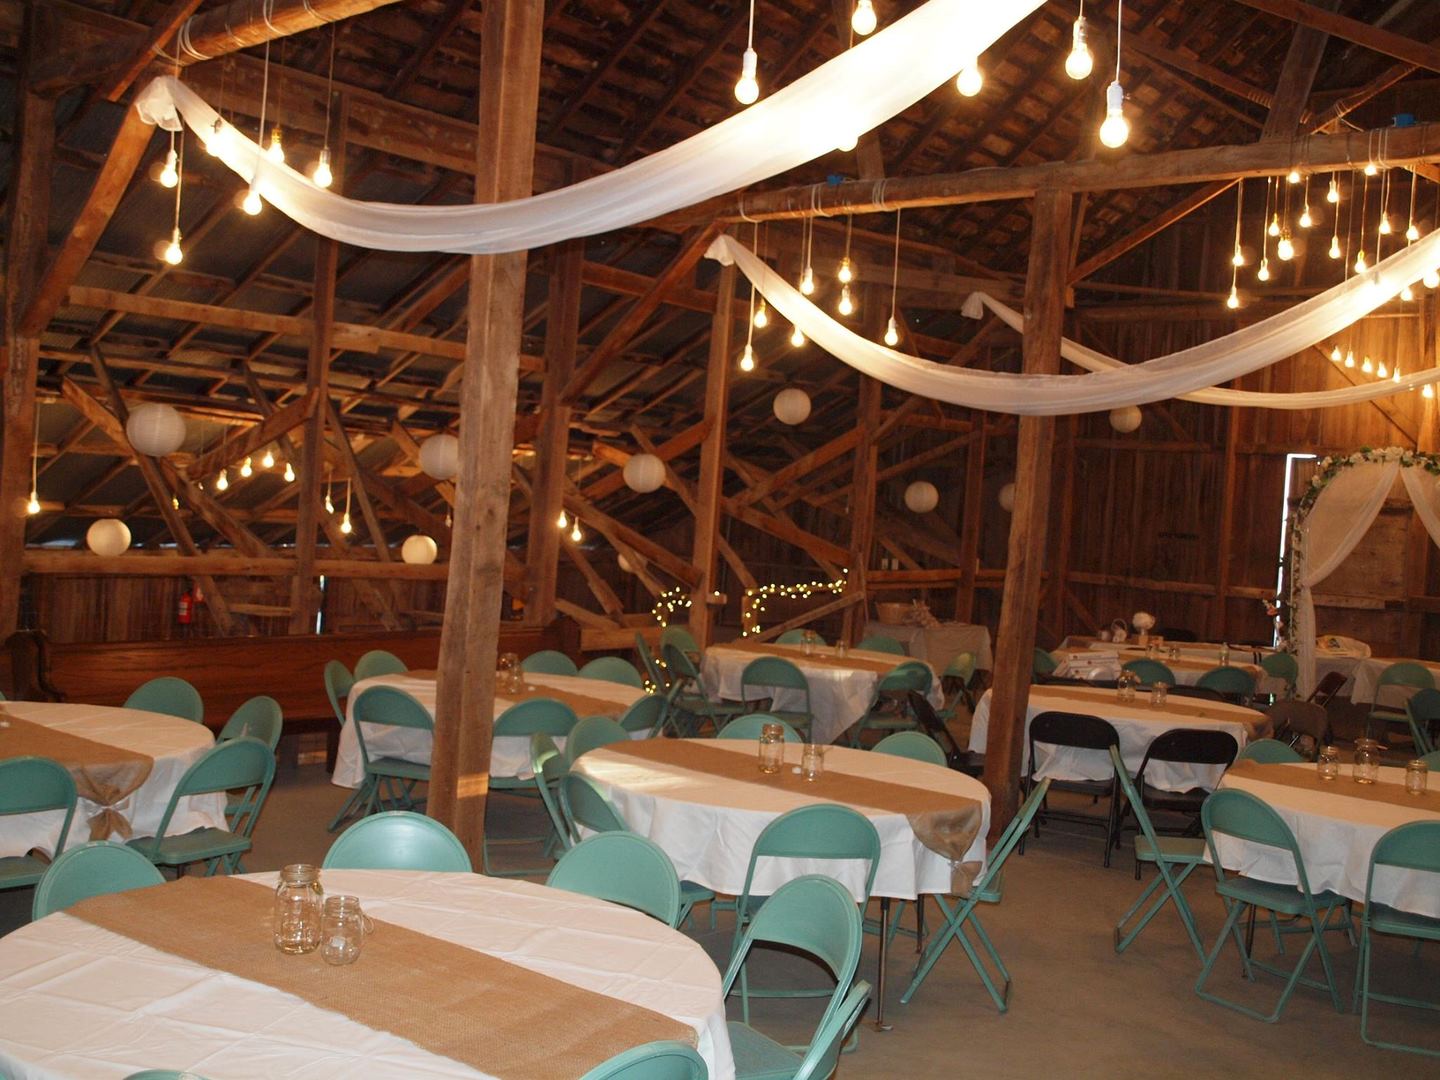 Just The Place Barn Weddings - 5